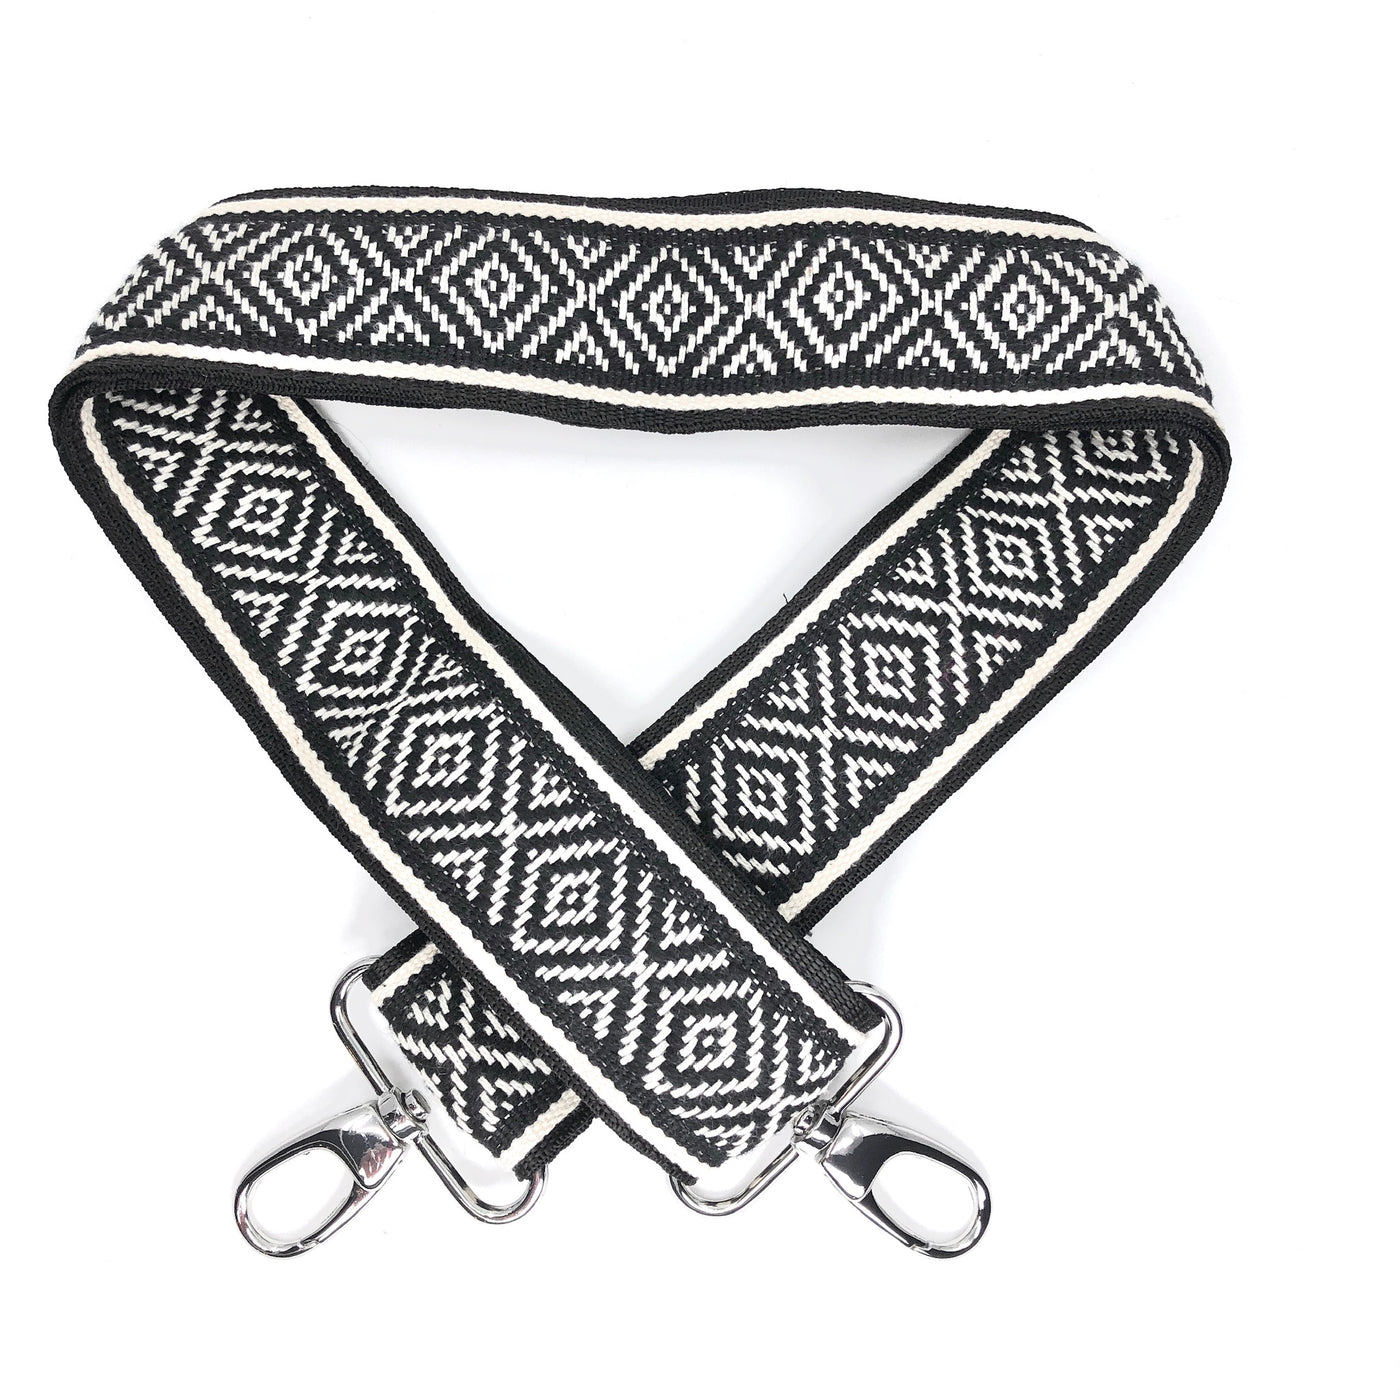 A black and white diamond patterned woven messenger strap with sliver-colored buckles, shown laying on a plain white background.